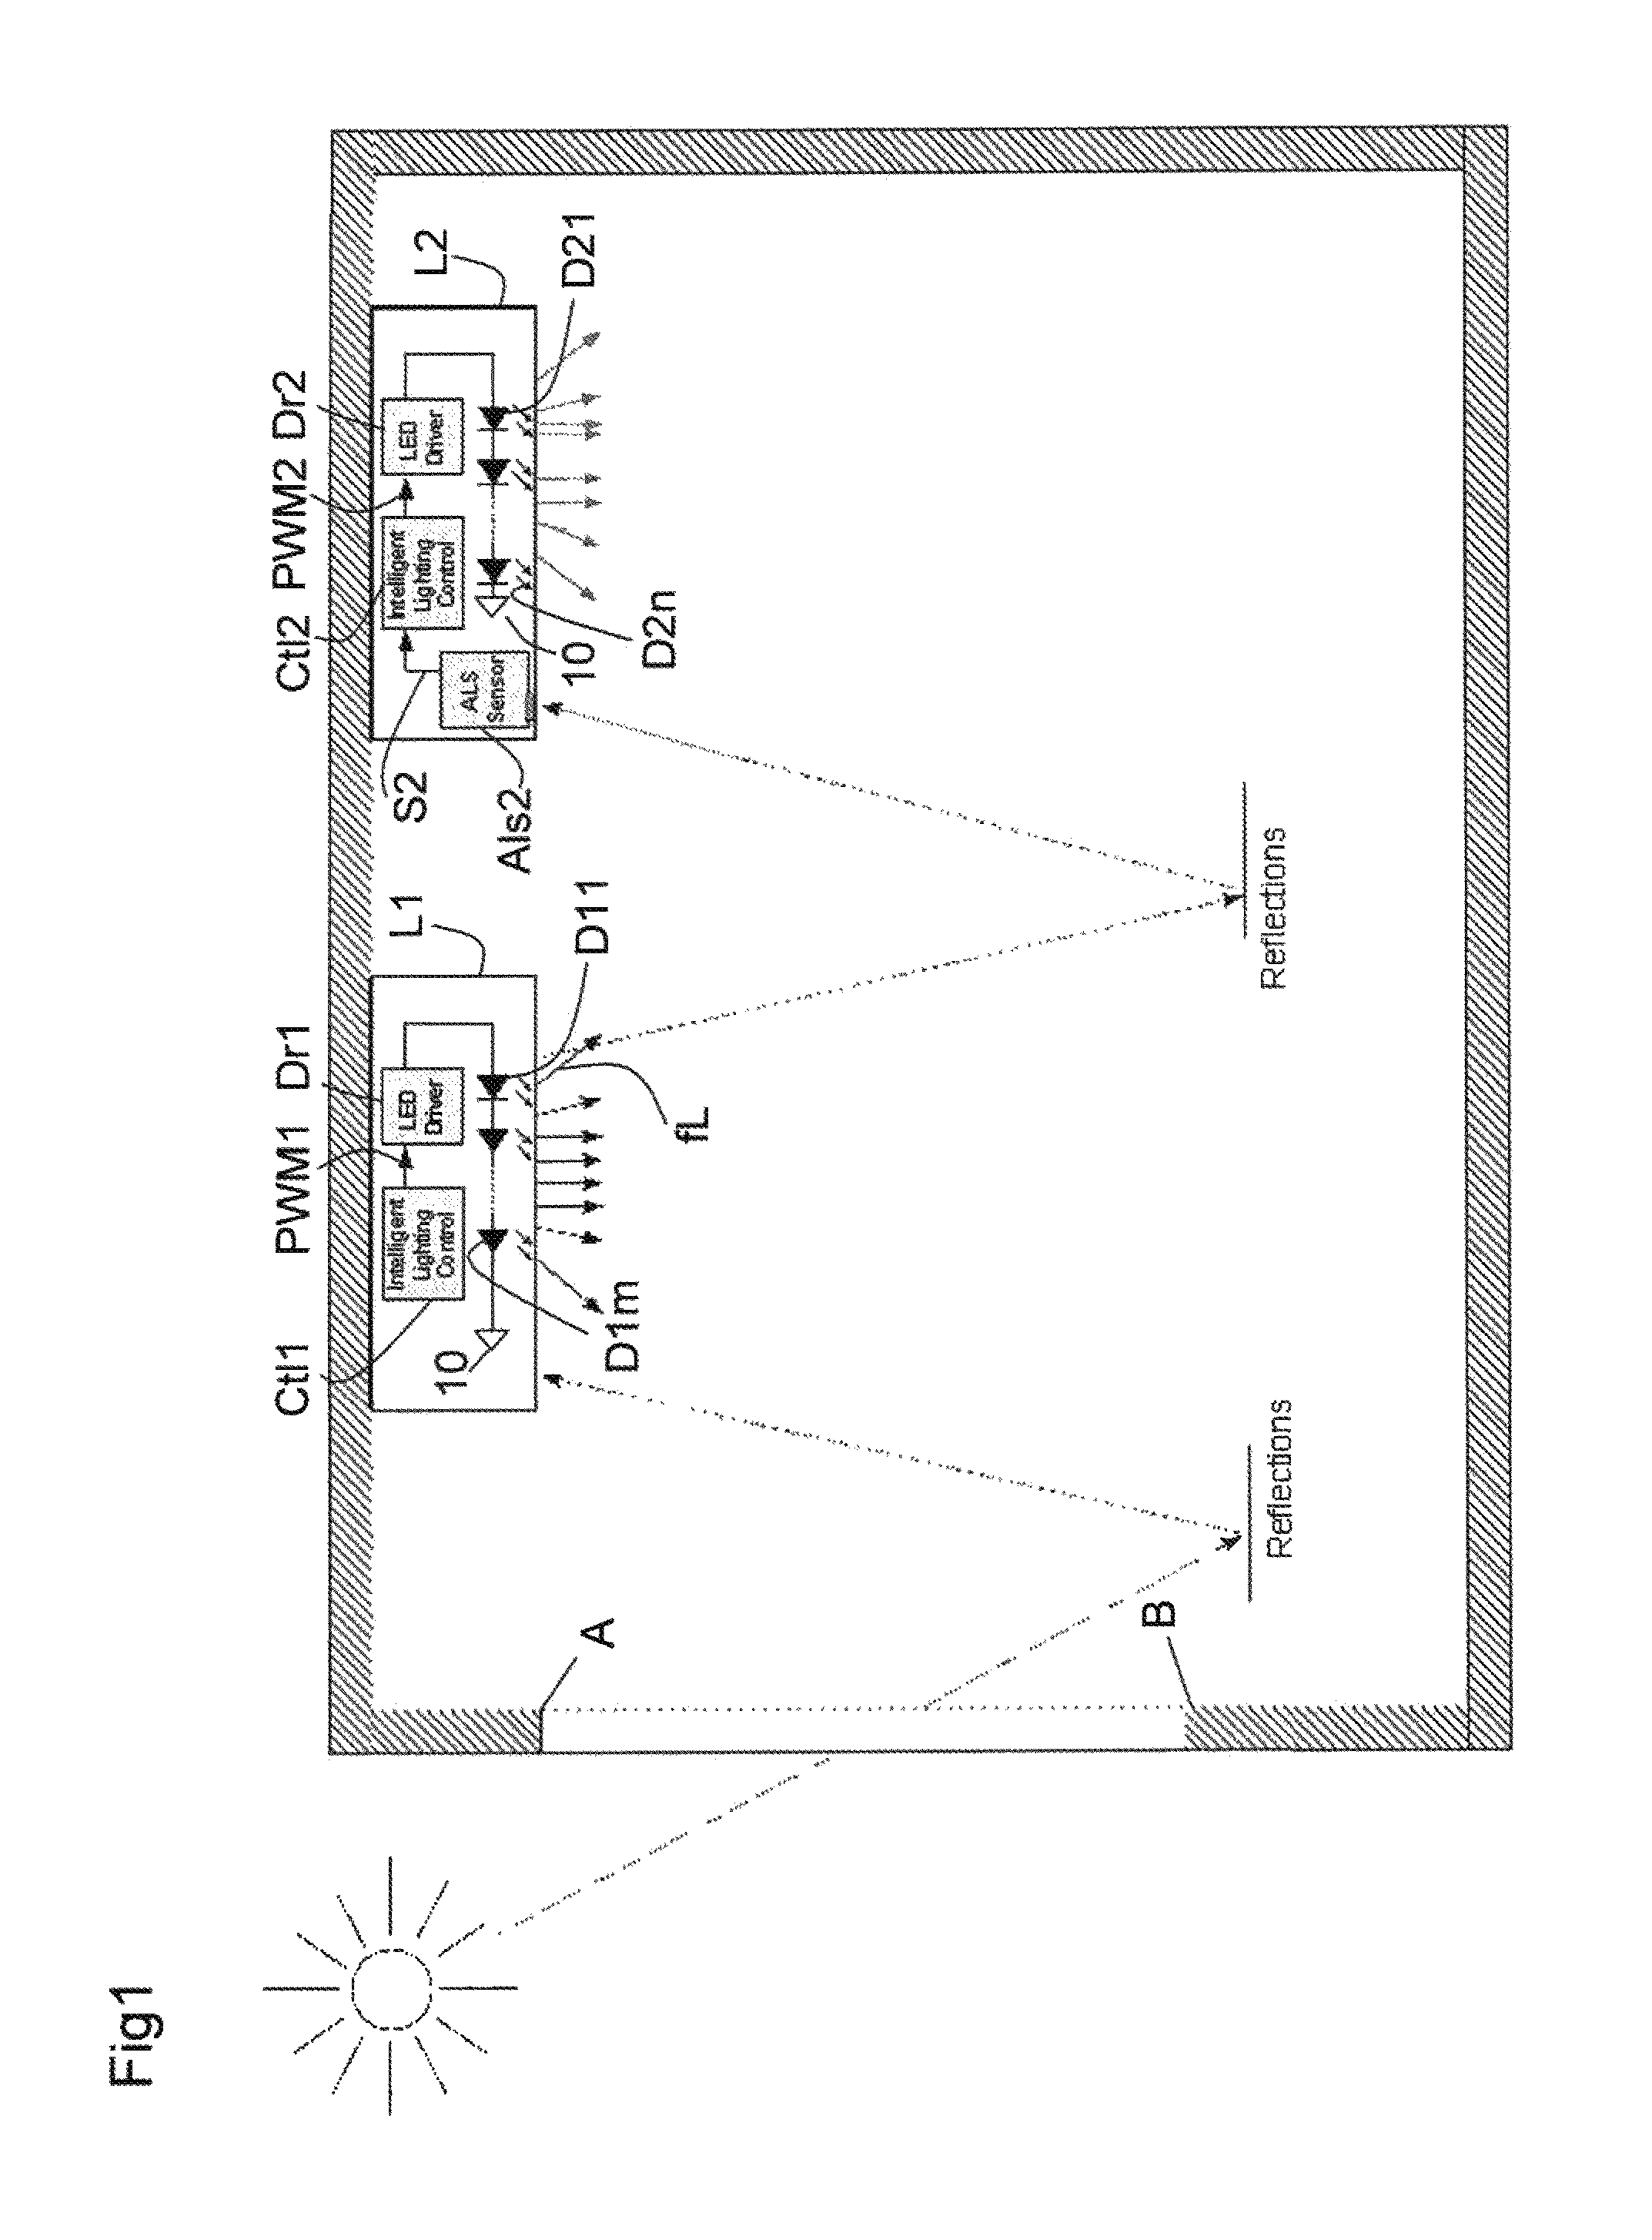 Electronic lighting system and method for lighting synchronization